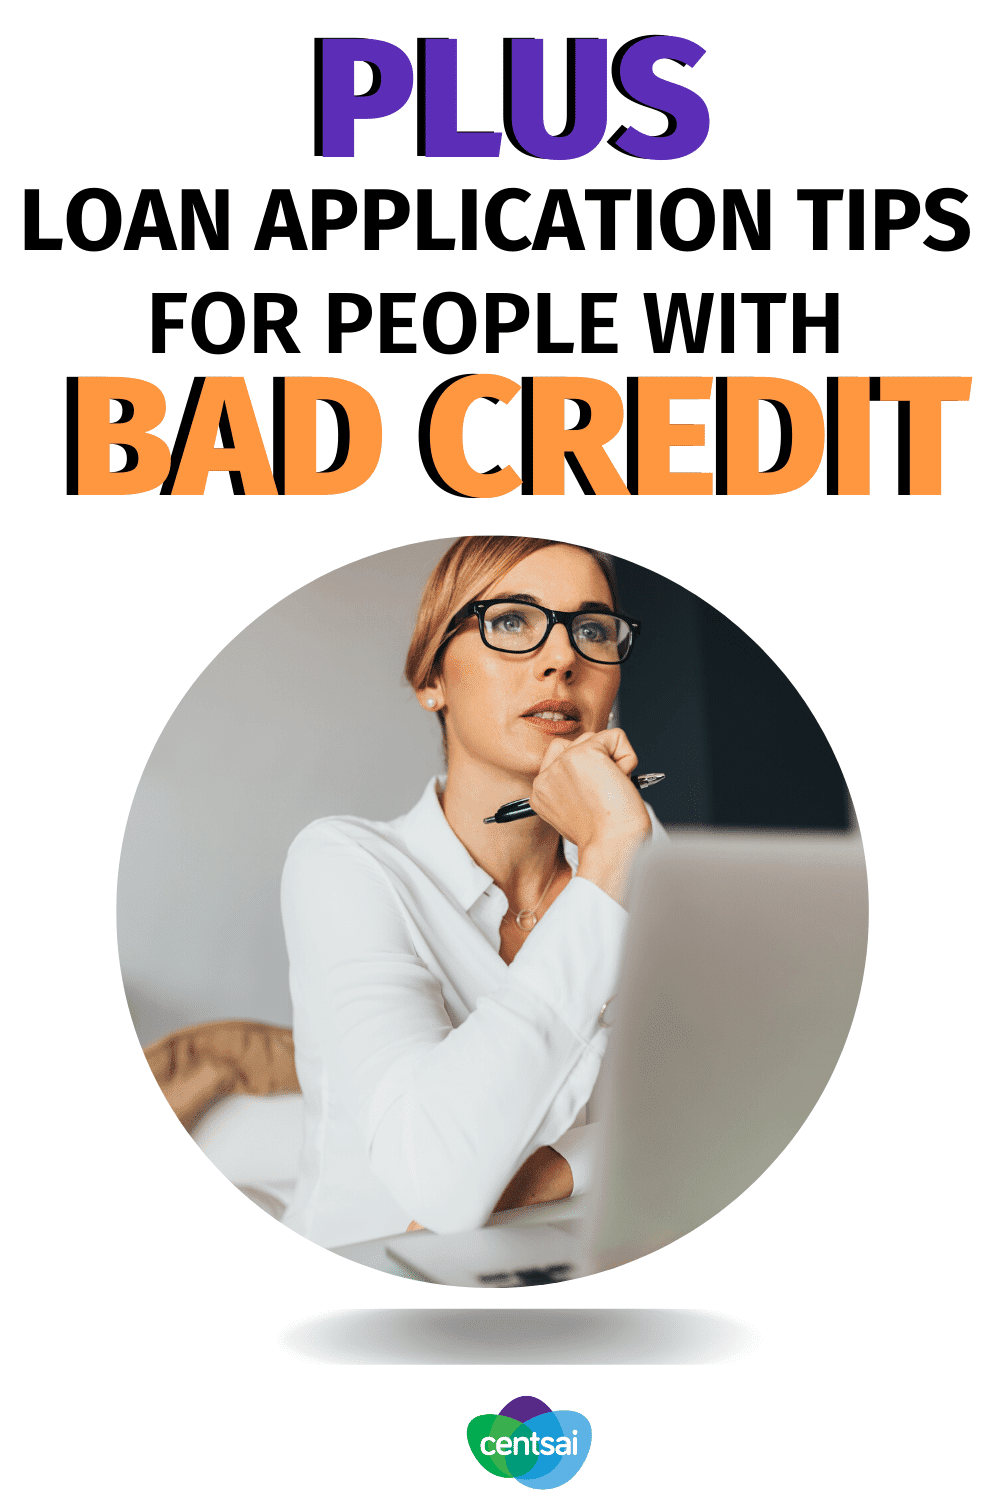 PLUS Loan Application Tips for People With Bad Credit